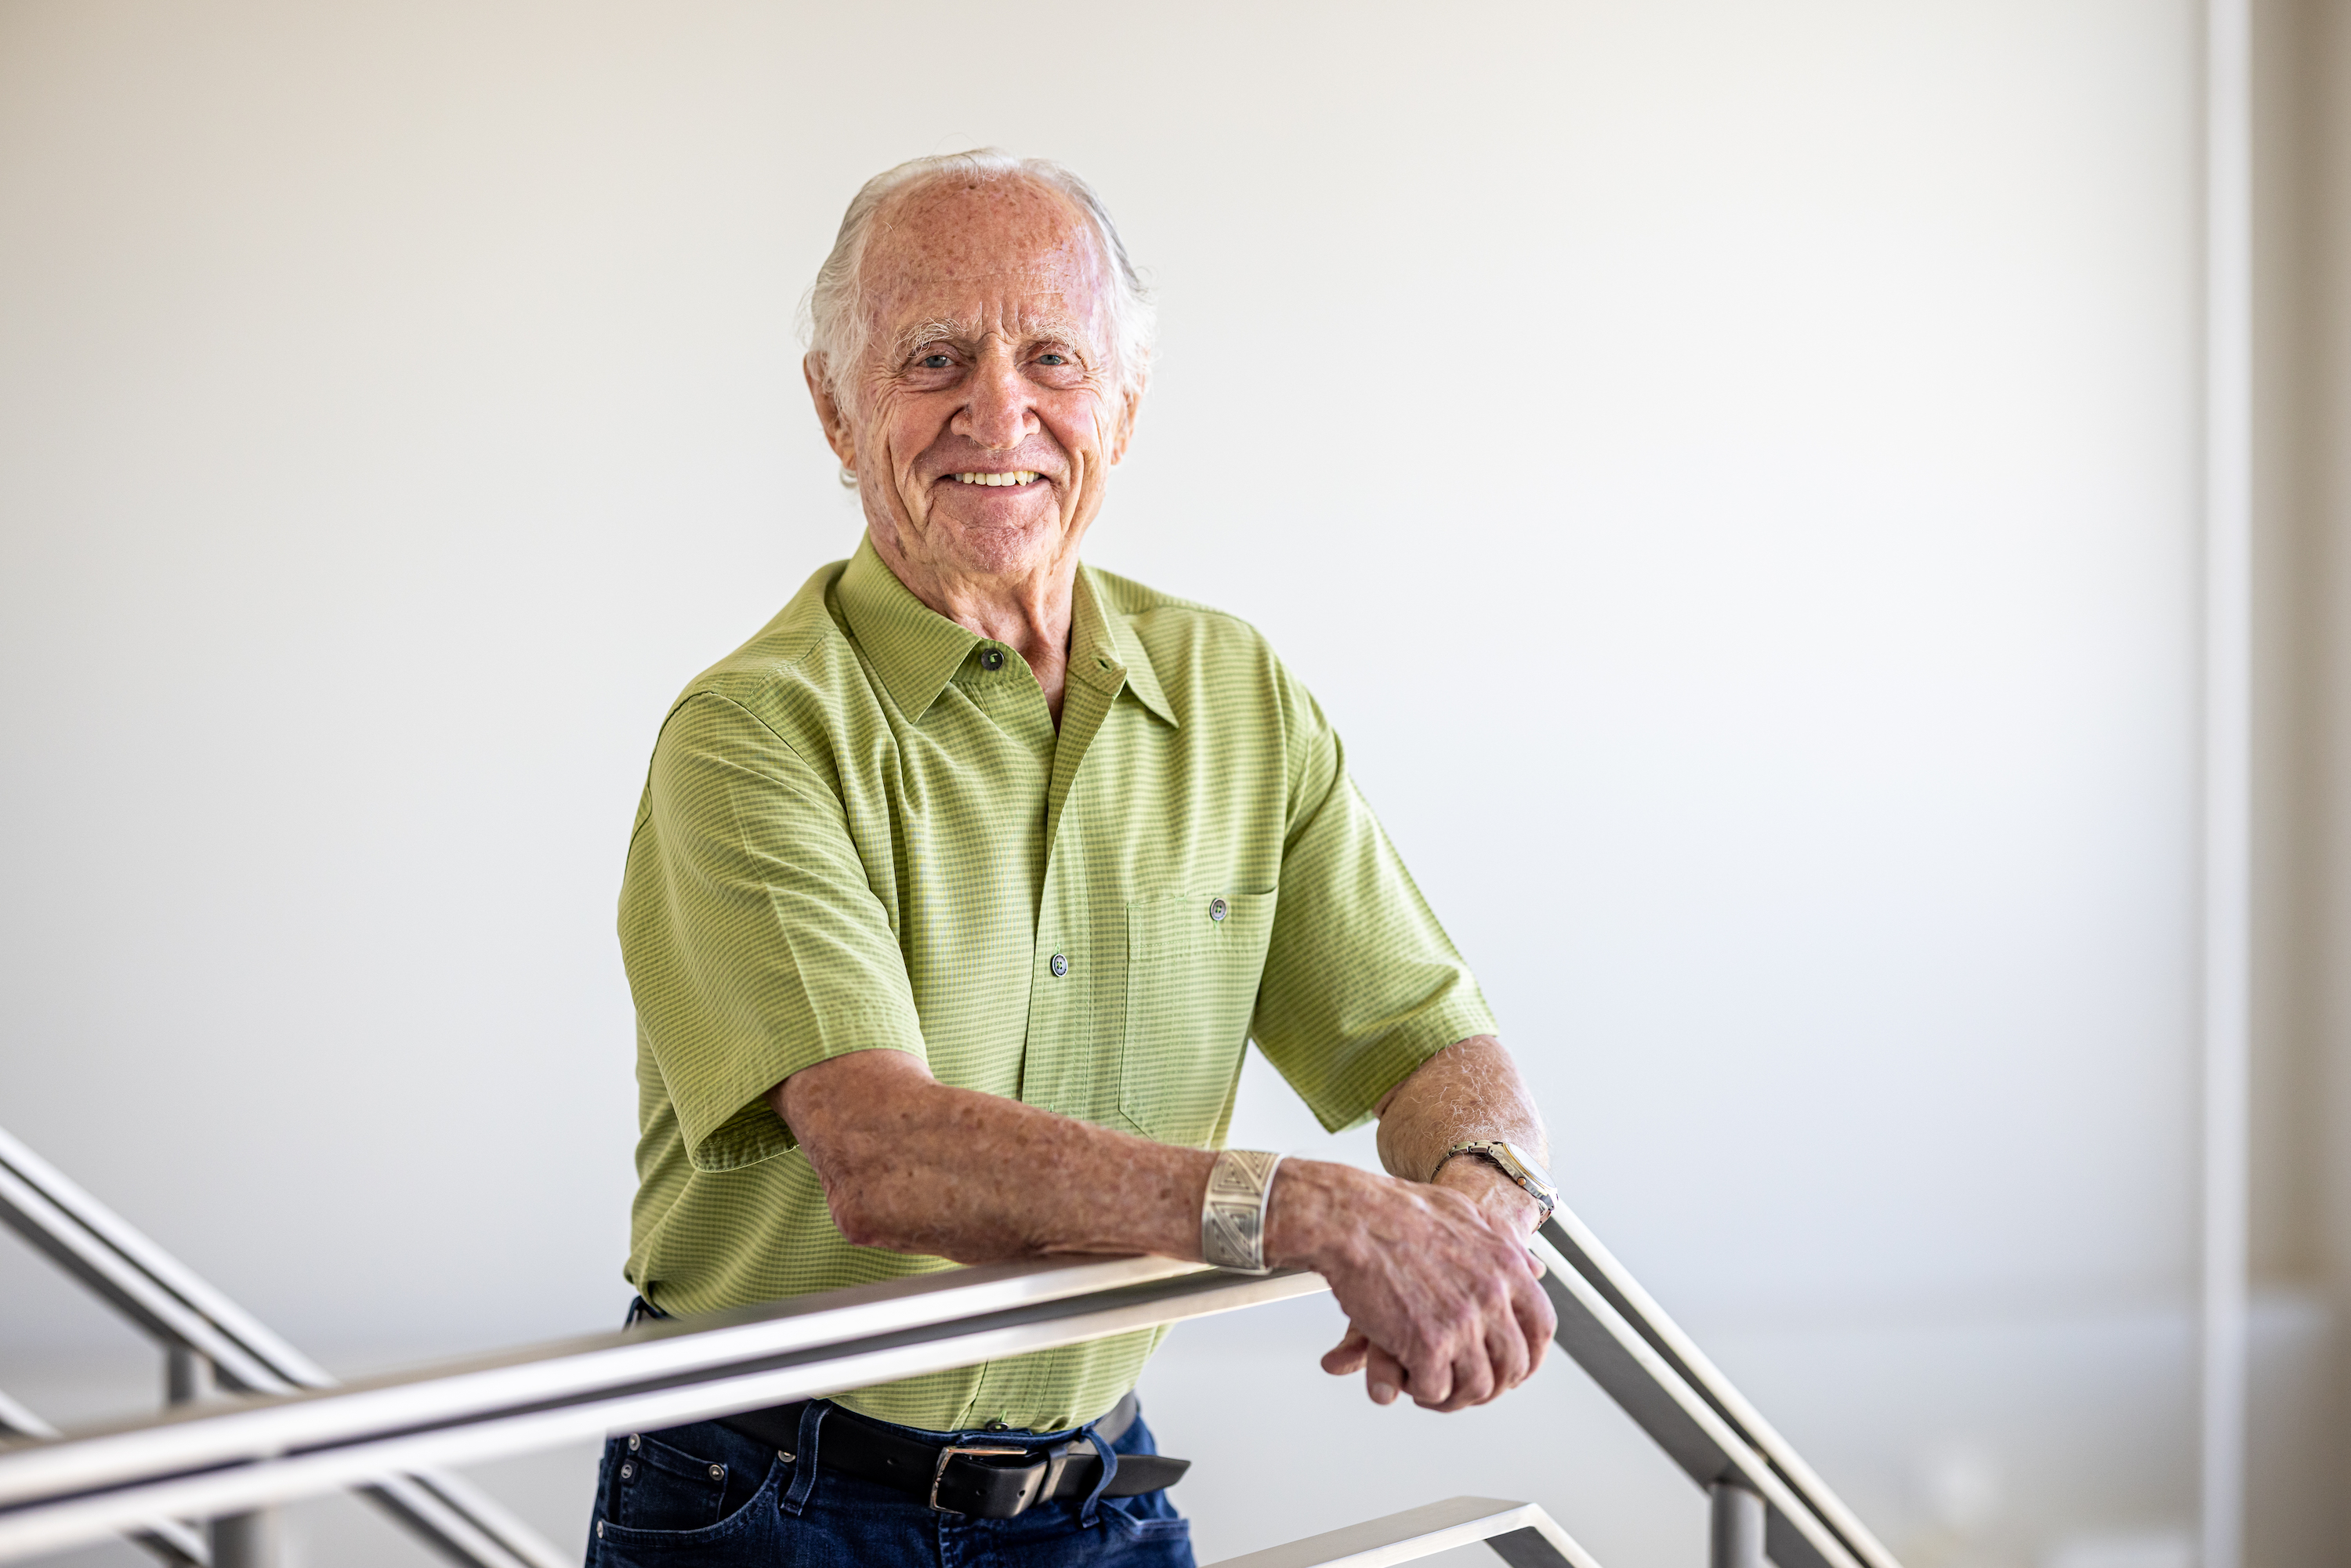 Nobel Laureate Mario Capecchi, Ph.D., standing at the top of the stairs.